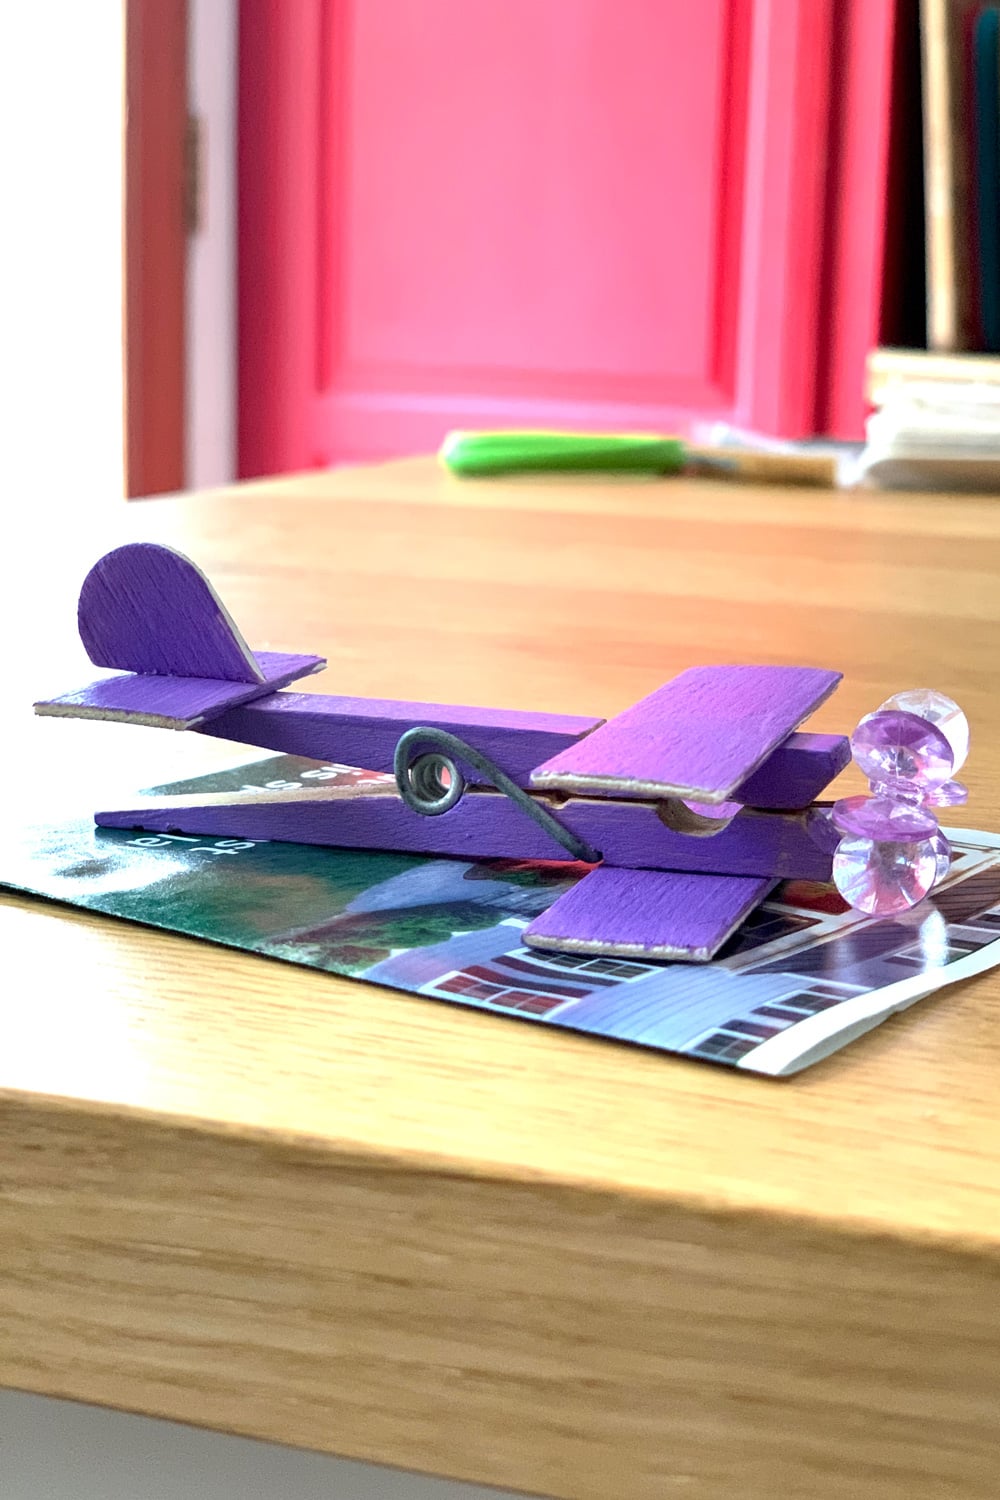 Side view of an assembled purple airplane with wings, a tail, rudder, and bead propeller.